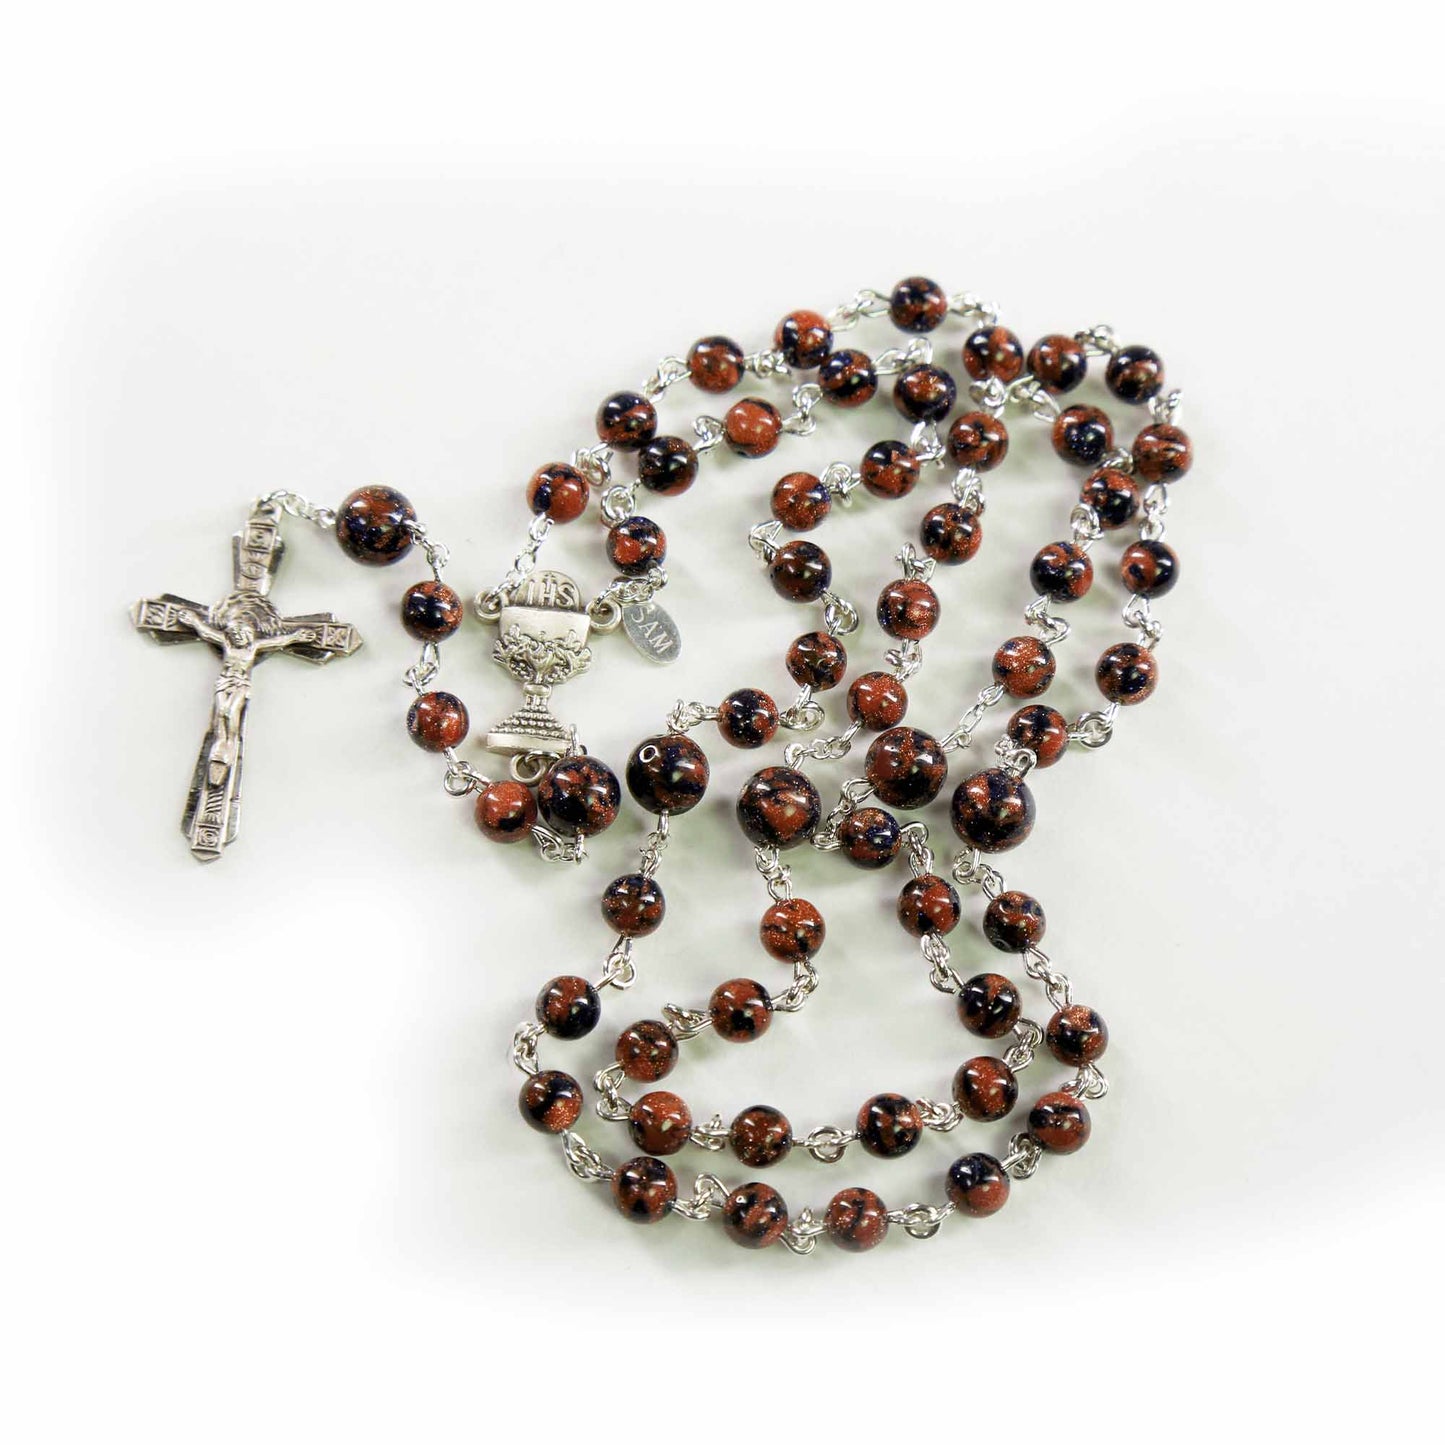 First Communion Blue and Brown Sandstone Rosary